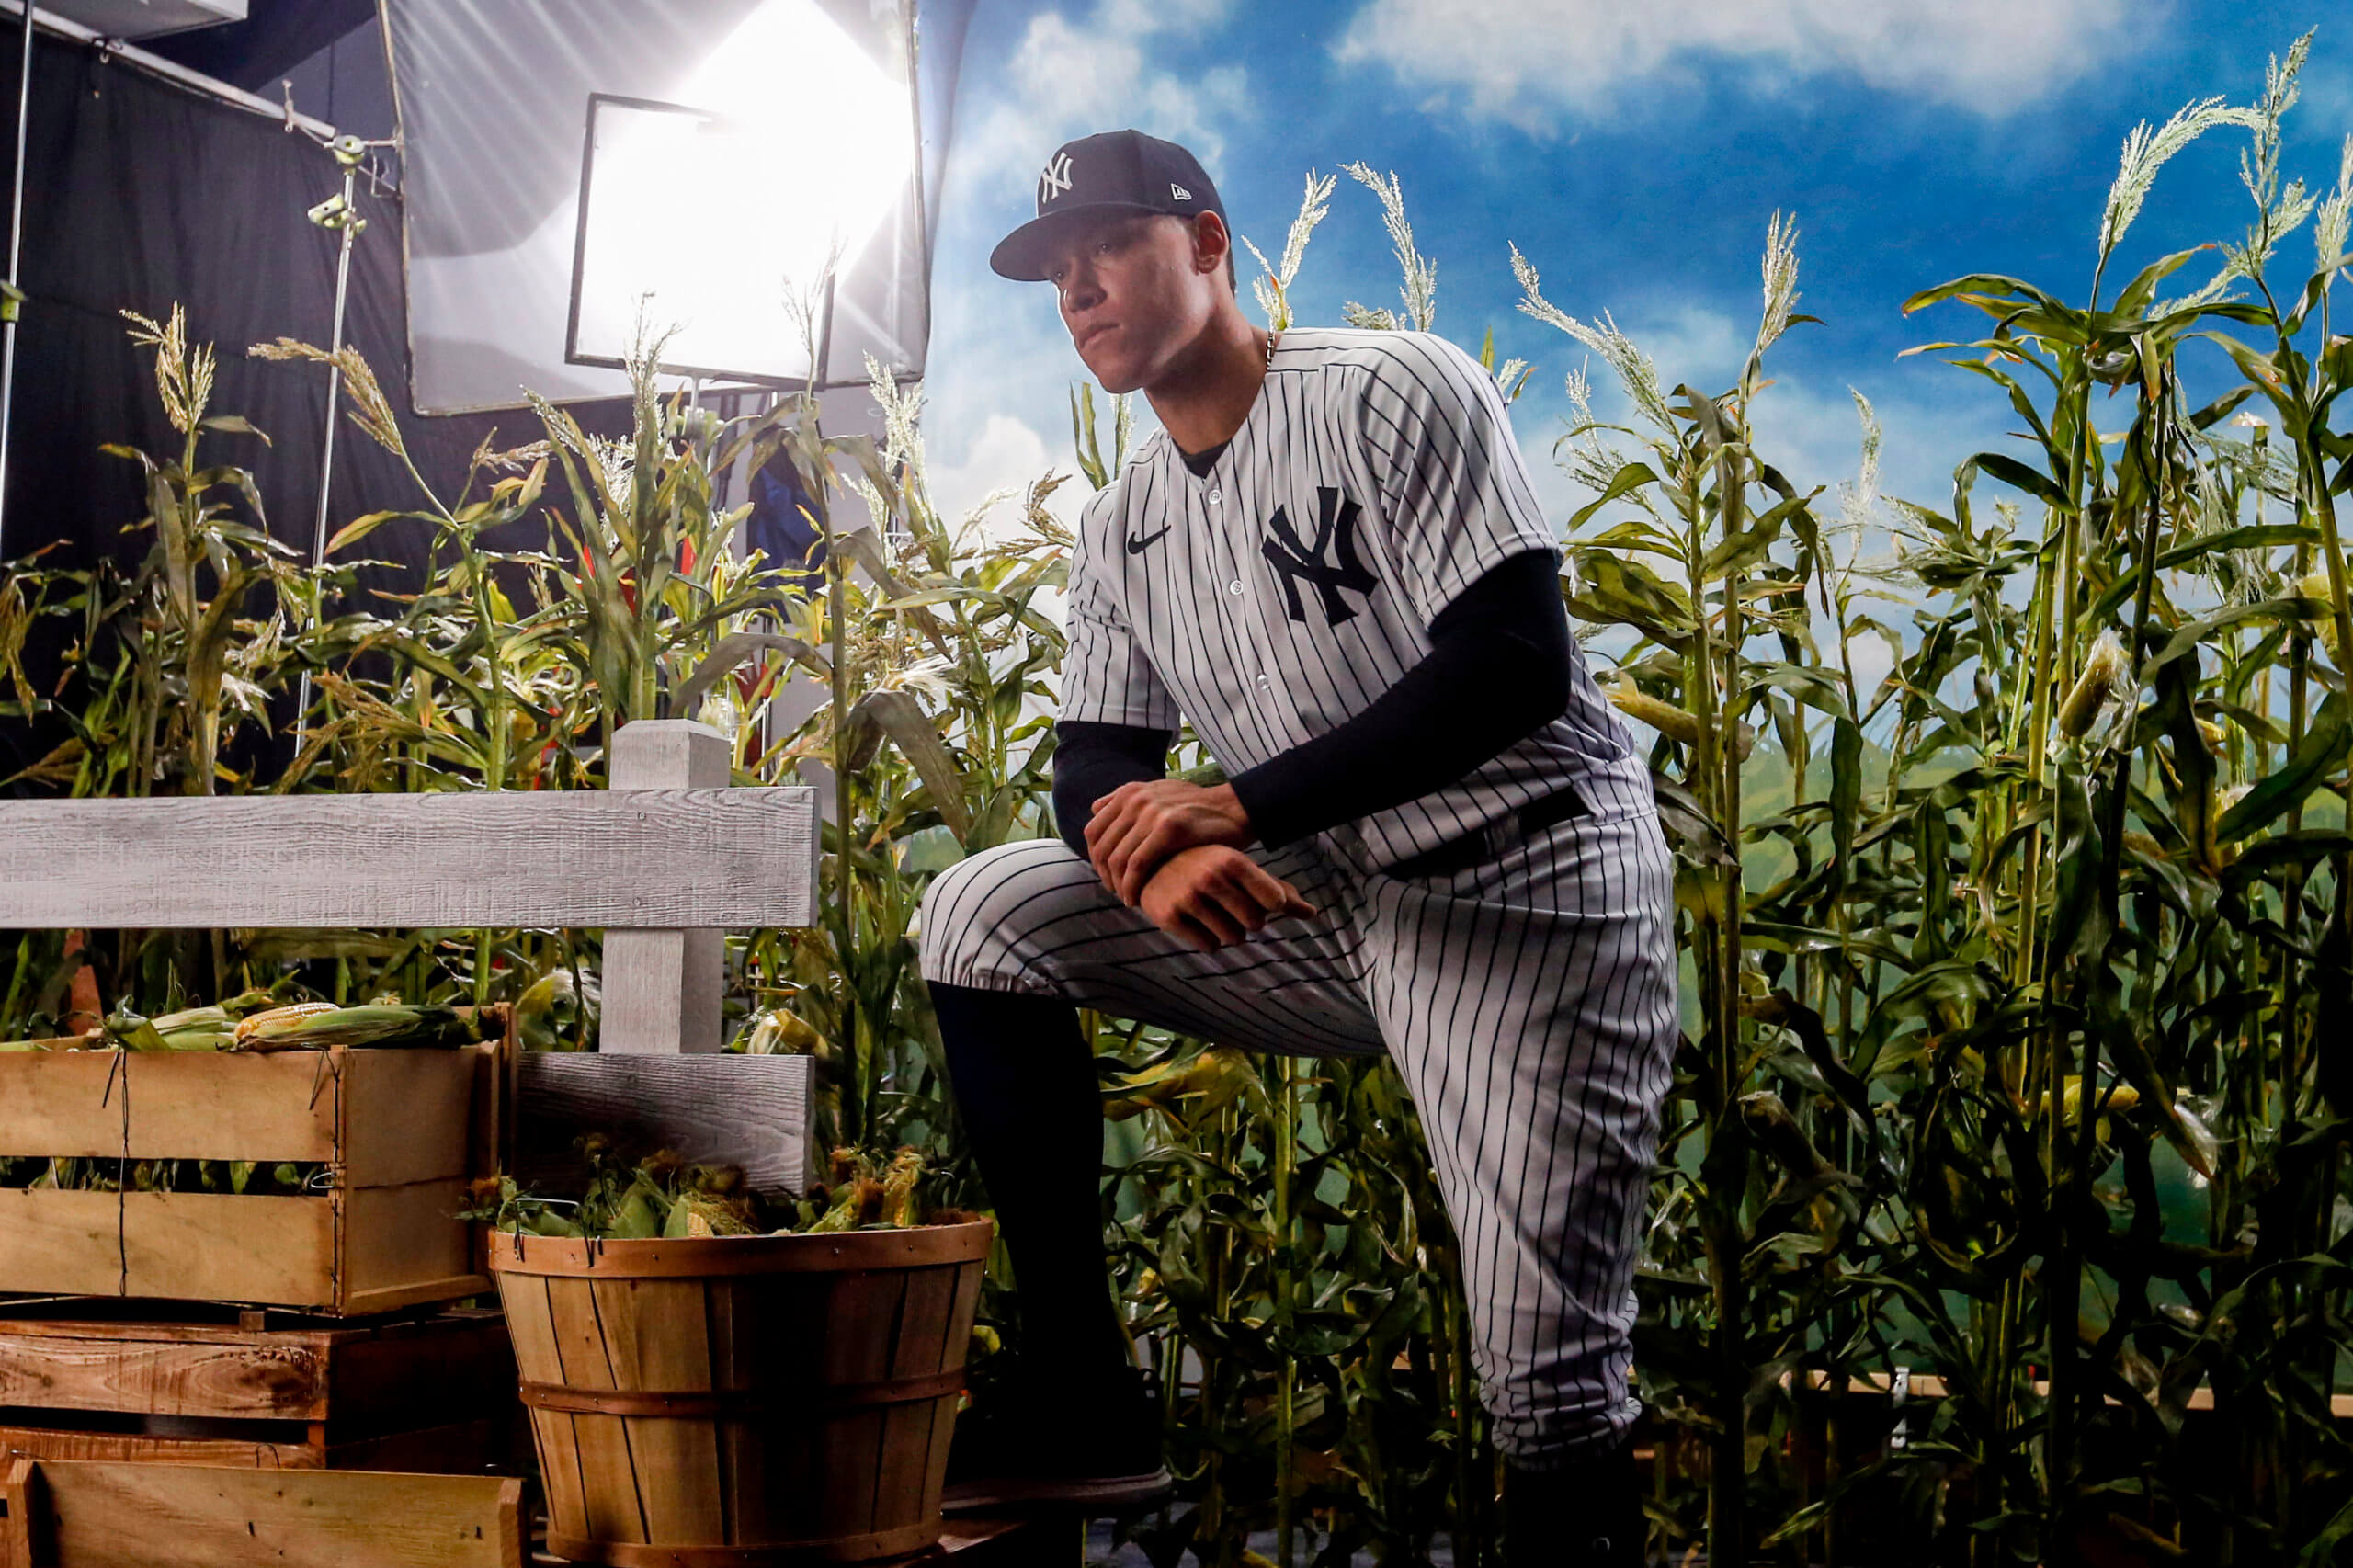 Yankees to participate in MLB's Field of Dreams game vs. White Sox Aug. 12